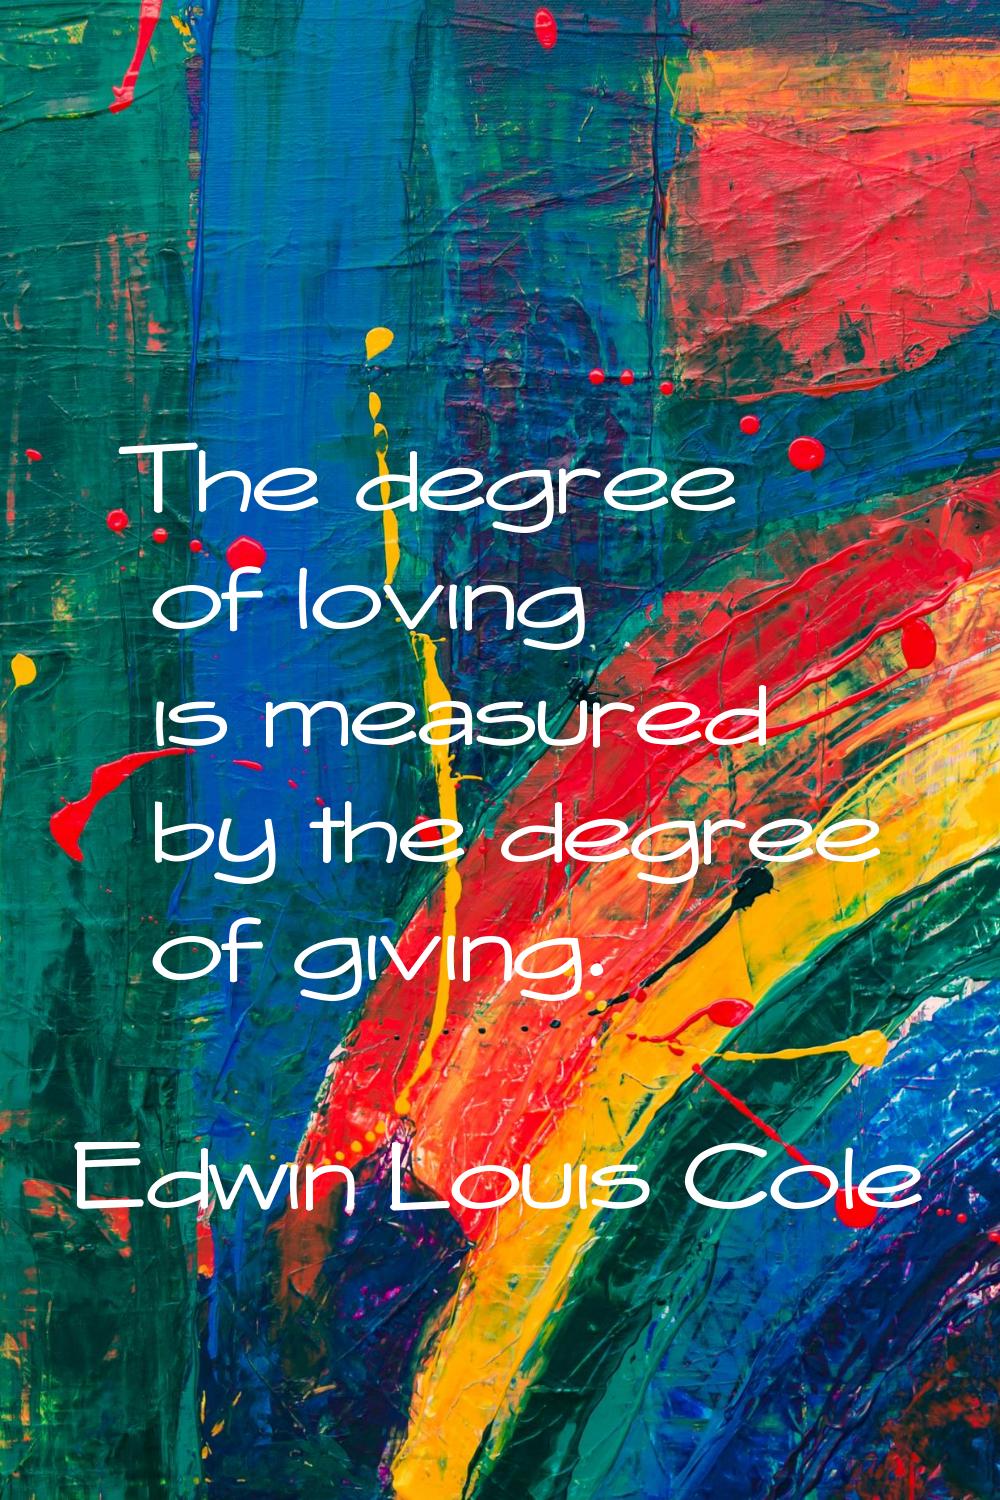 The degree of loving is measured by the degree of giving.